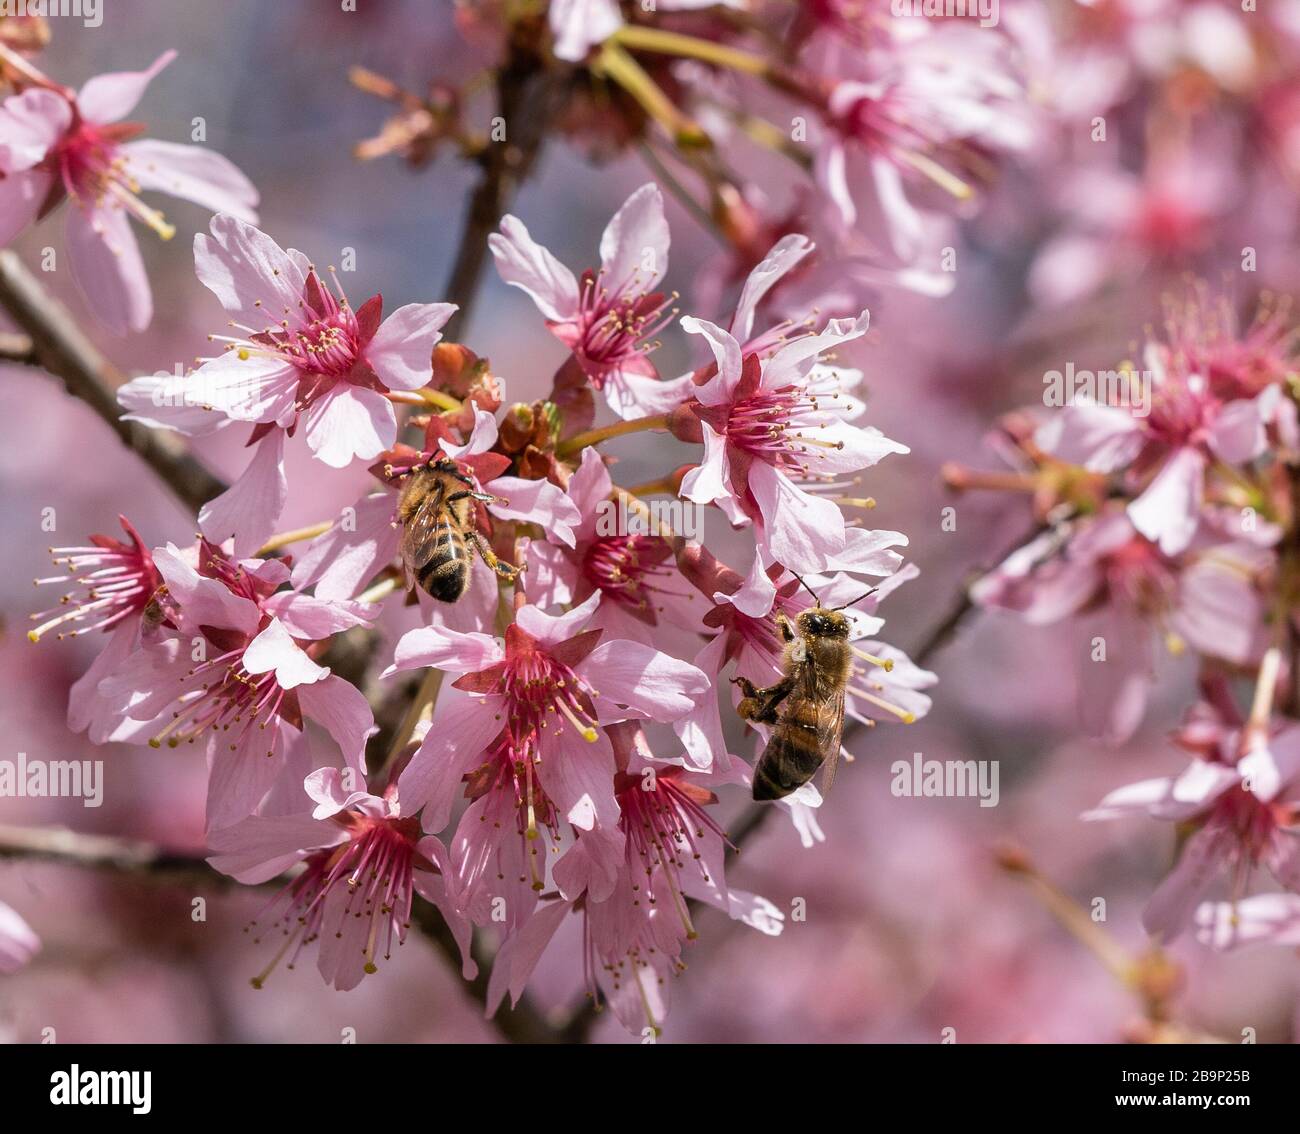 Honeybees gathering pollen on pink cherry blossoms. Stock Photo